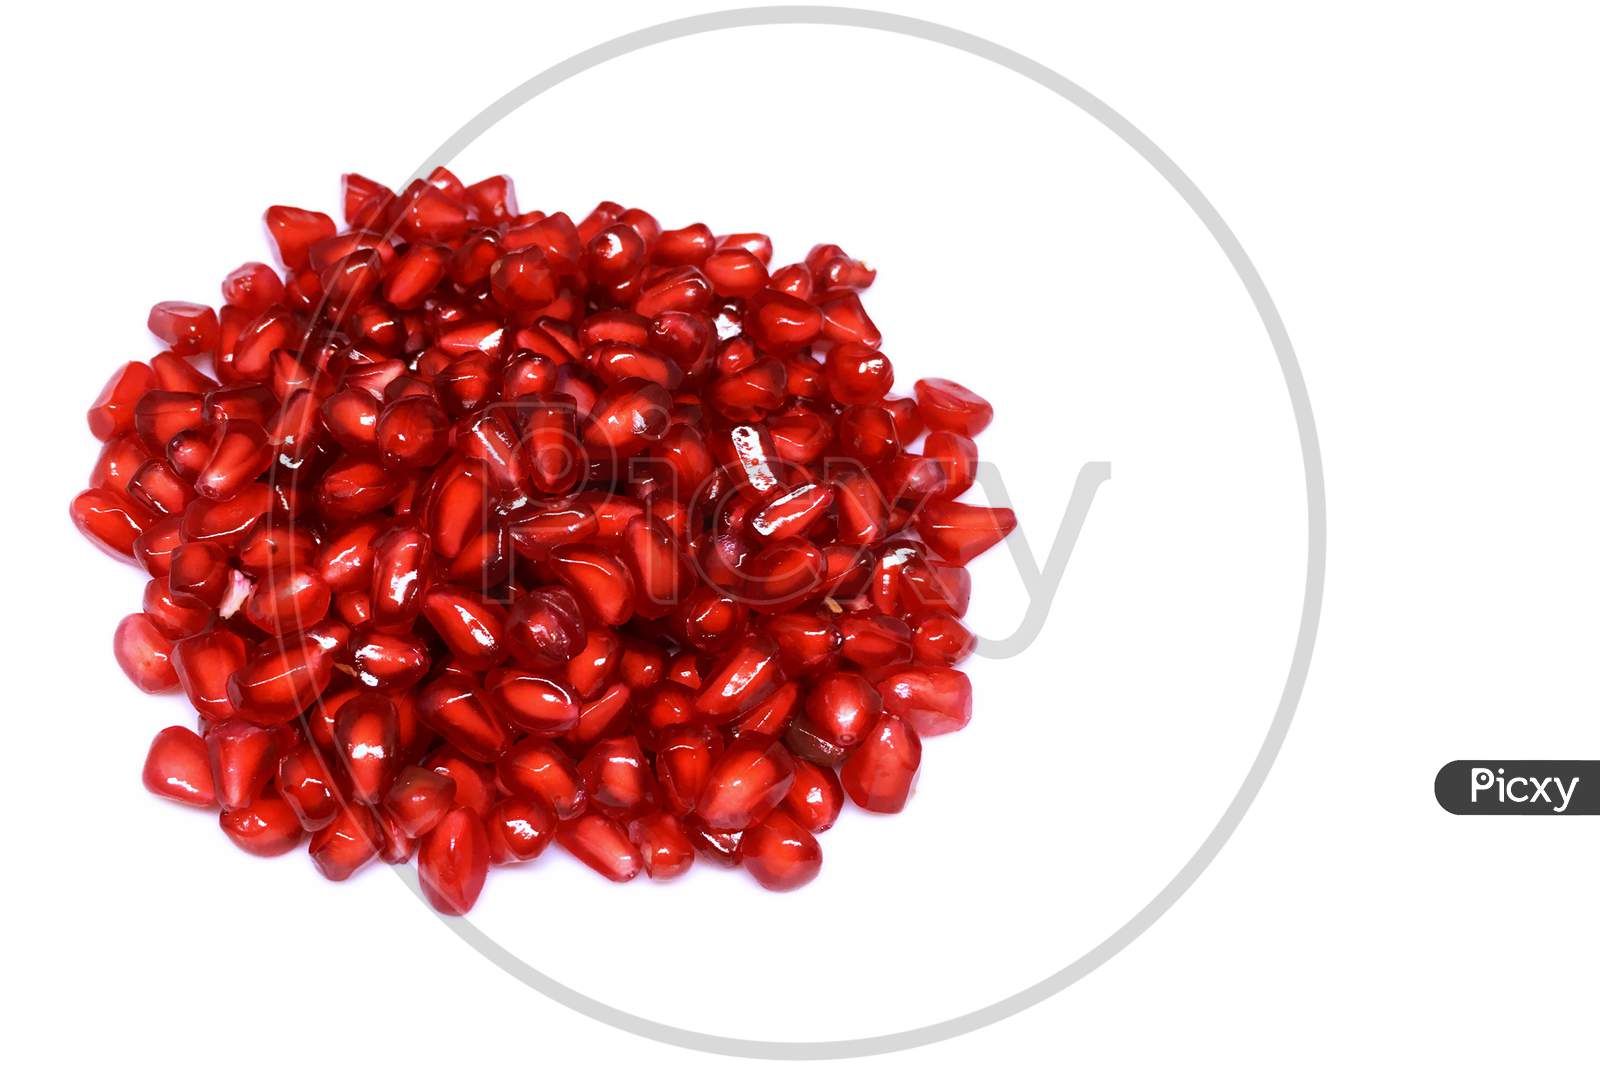 Red fresh pomegranate seeds isolated on white background